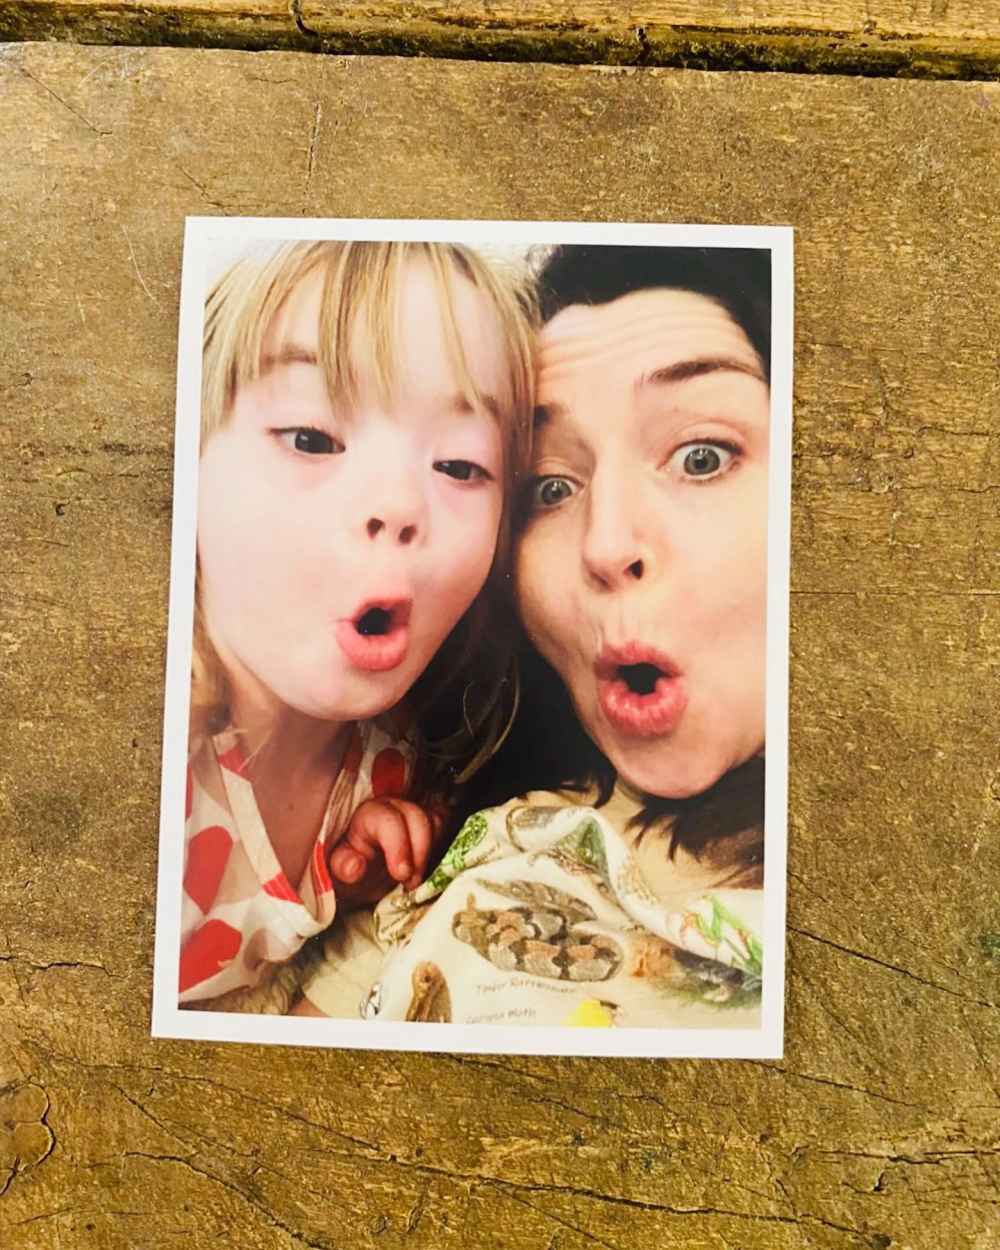 Caterina Scorsone Celebrates World Down Syndrome Day With Daughter Pippa